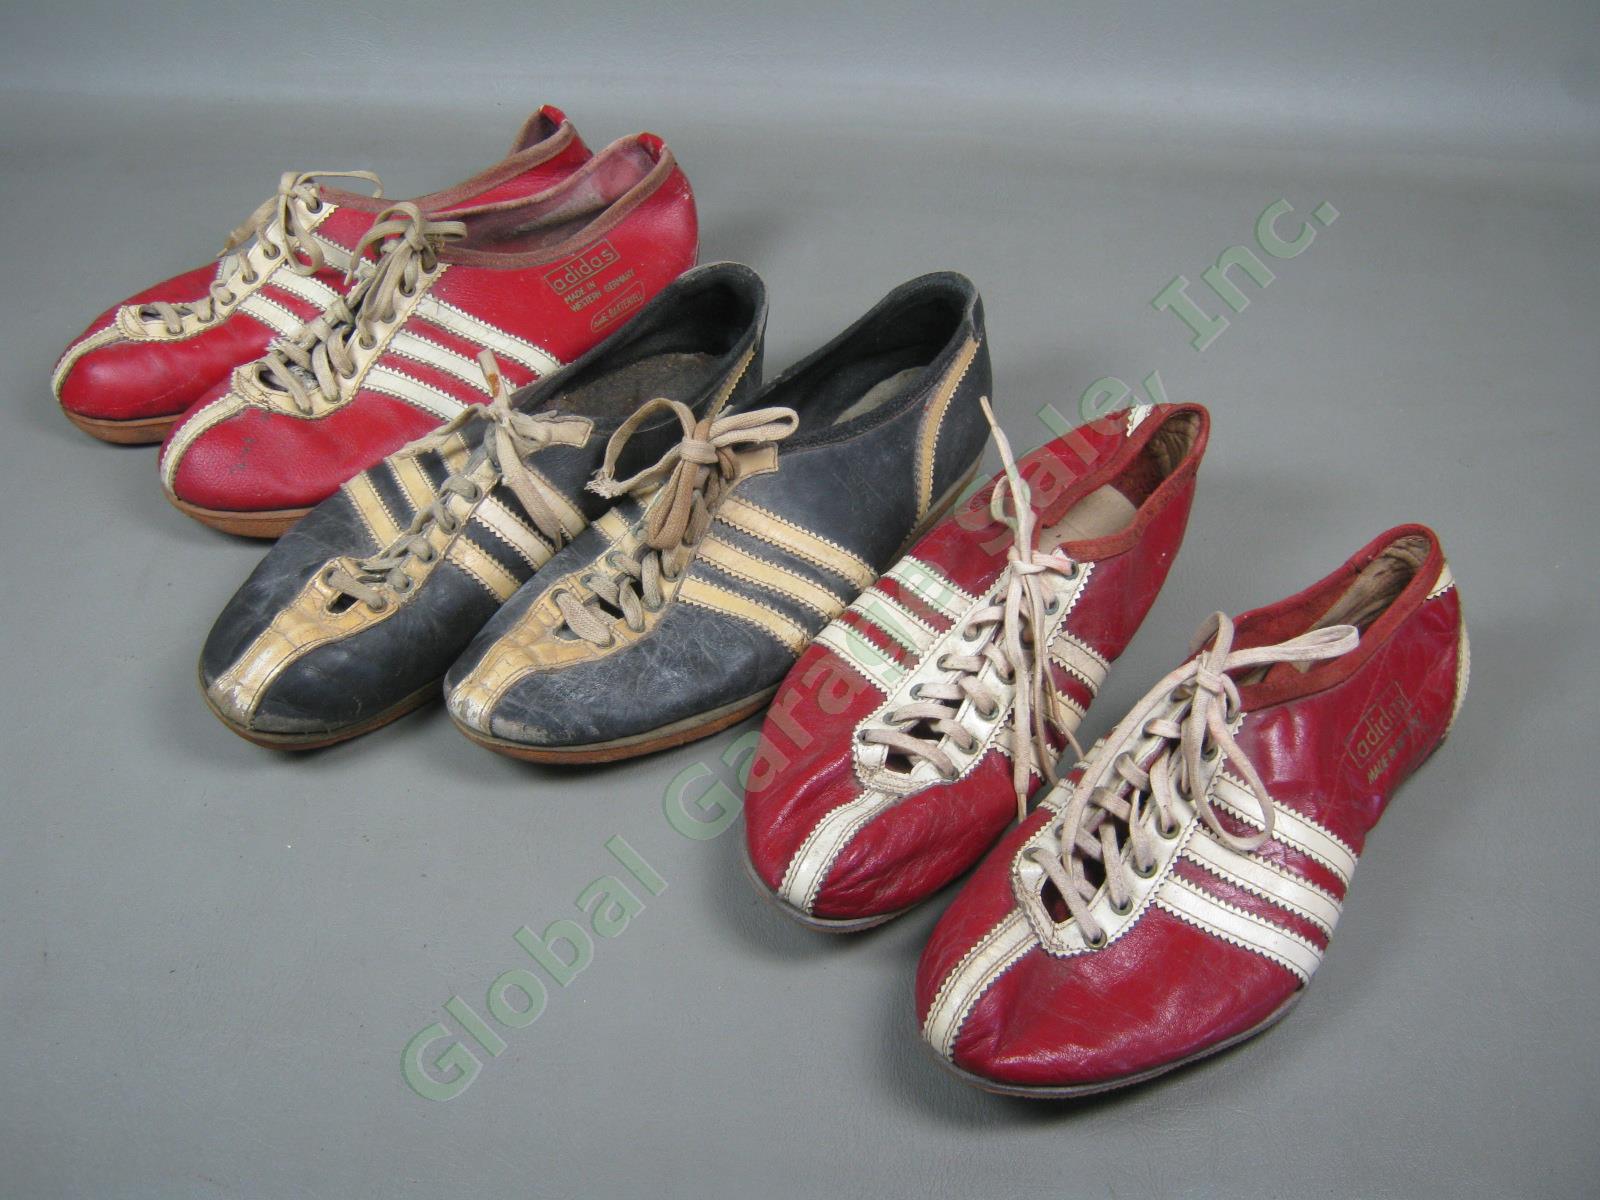 3 Pairs Vtg West Germany Adidas Track & Field Shoes Lot Red Black 1 W/ Spikes NR 1